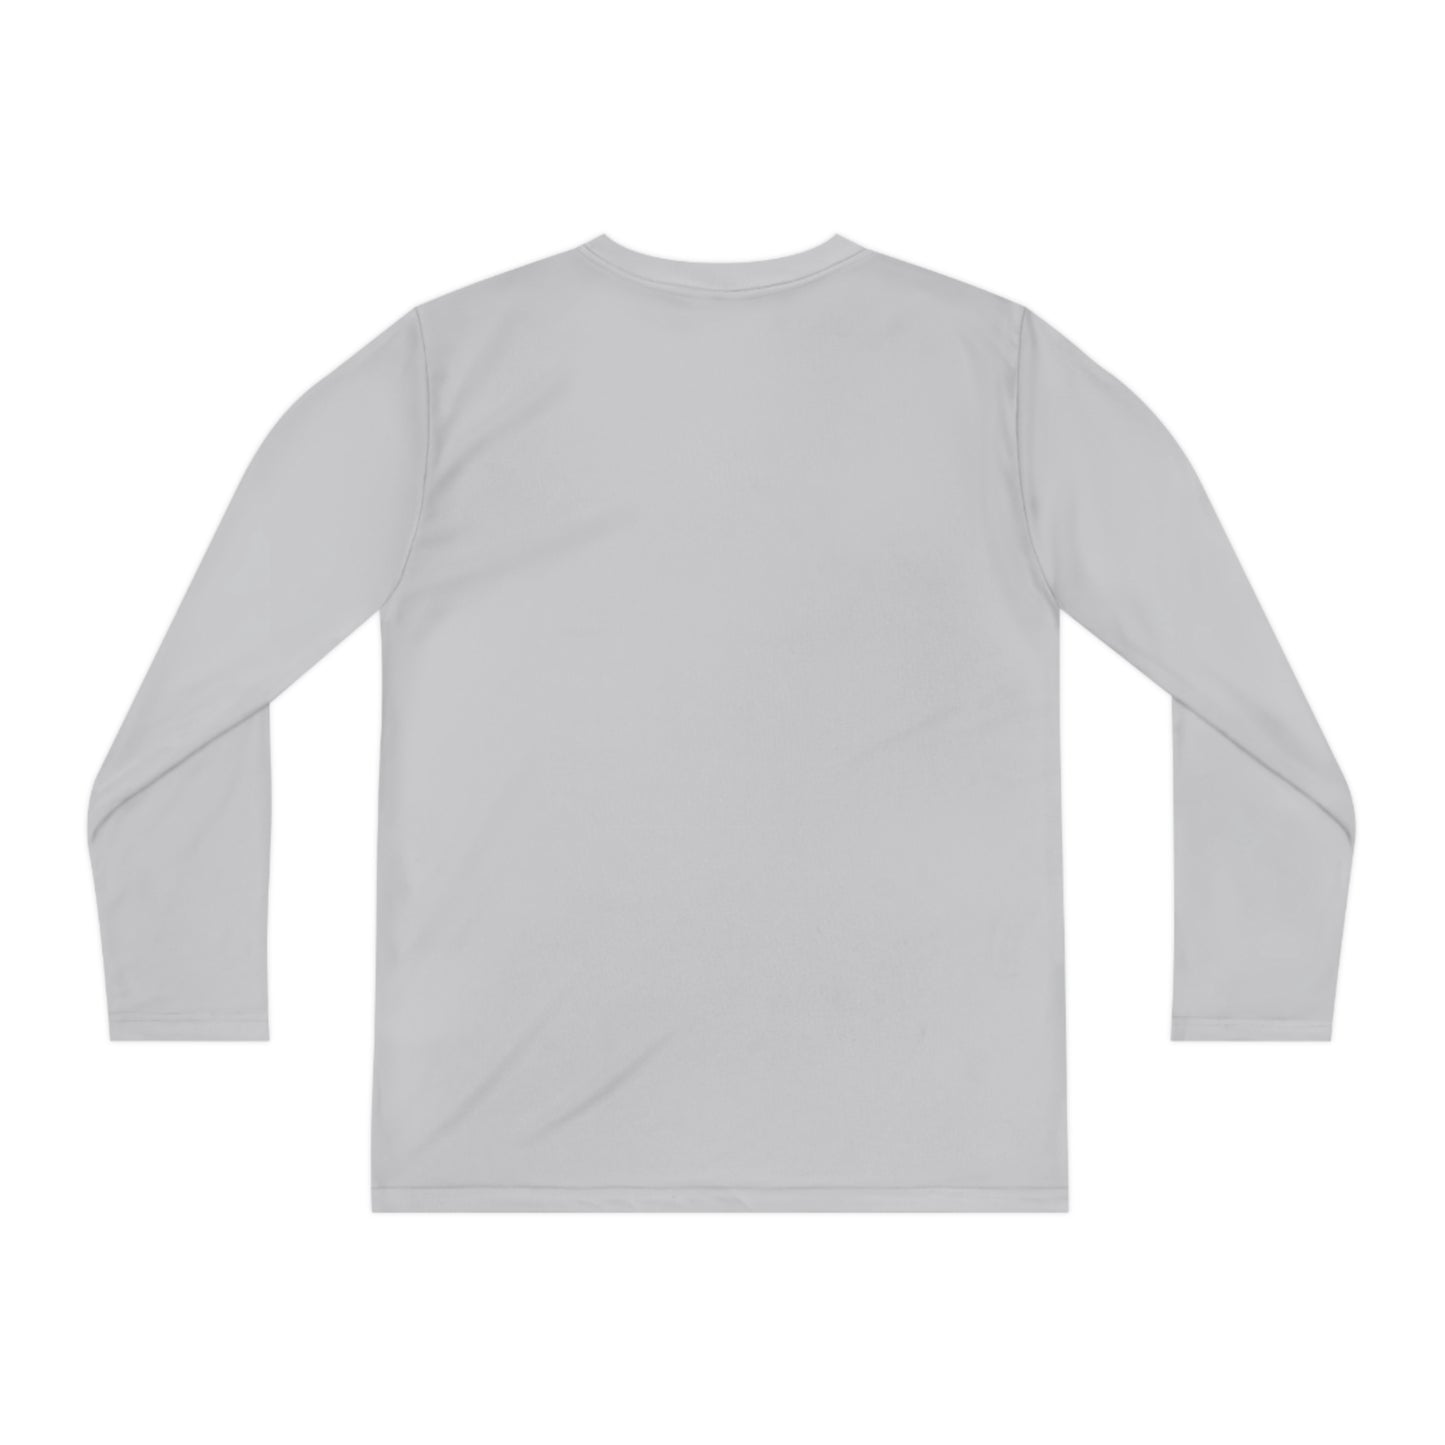 Youth Flag Dry-Fit Longsleeve [Design 1]